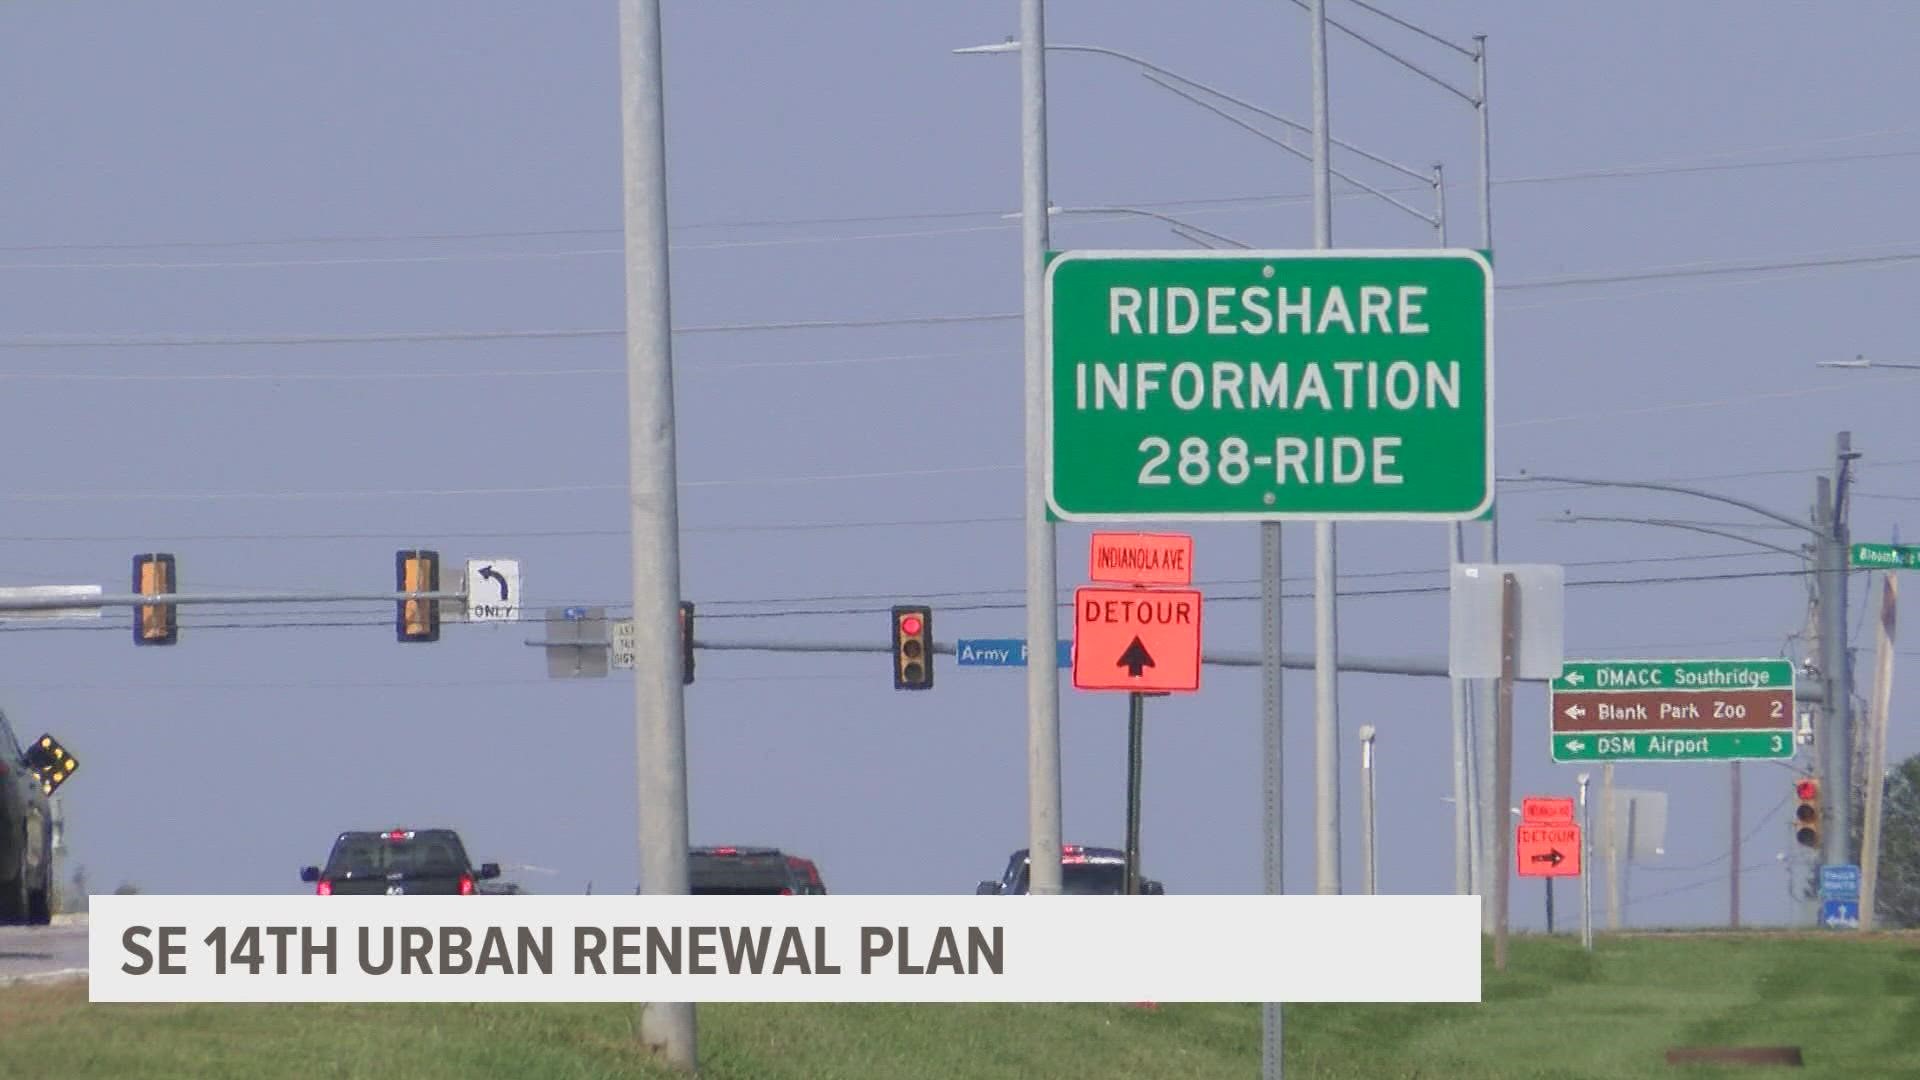 The southside of Des Moines could be seeing improvements as the city council is exploring an urban renewal plan in the area of Southeast 14th Street.